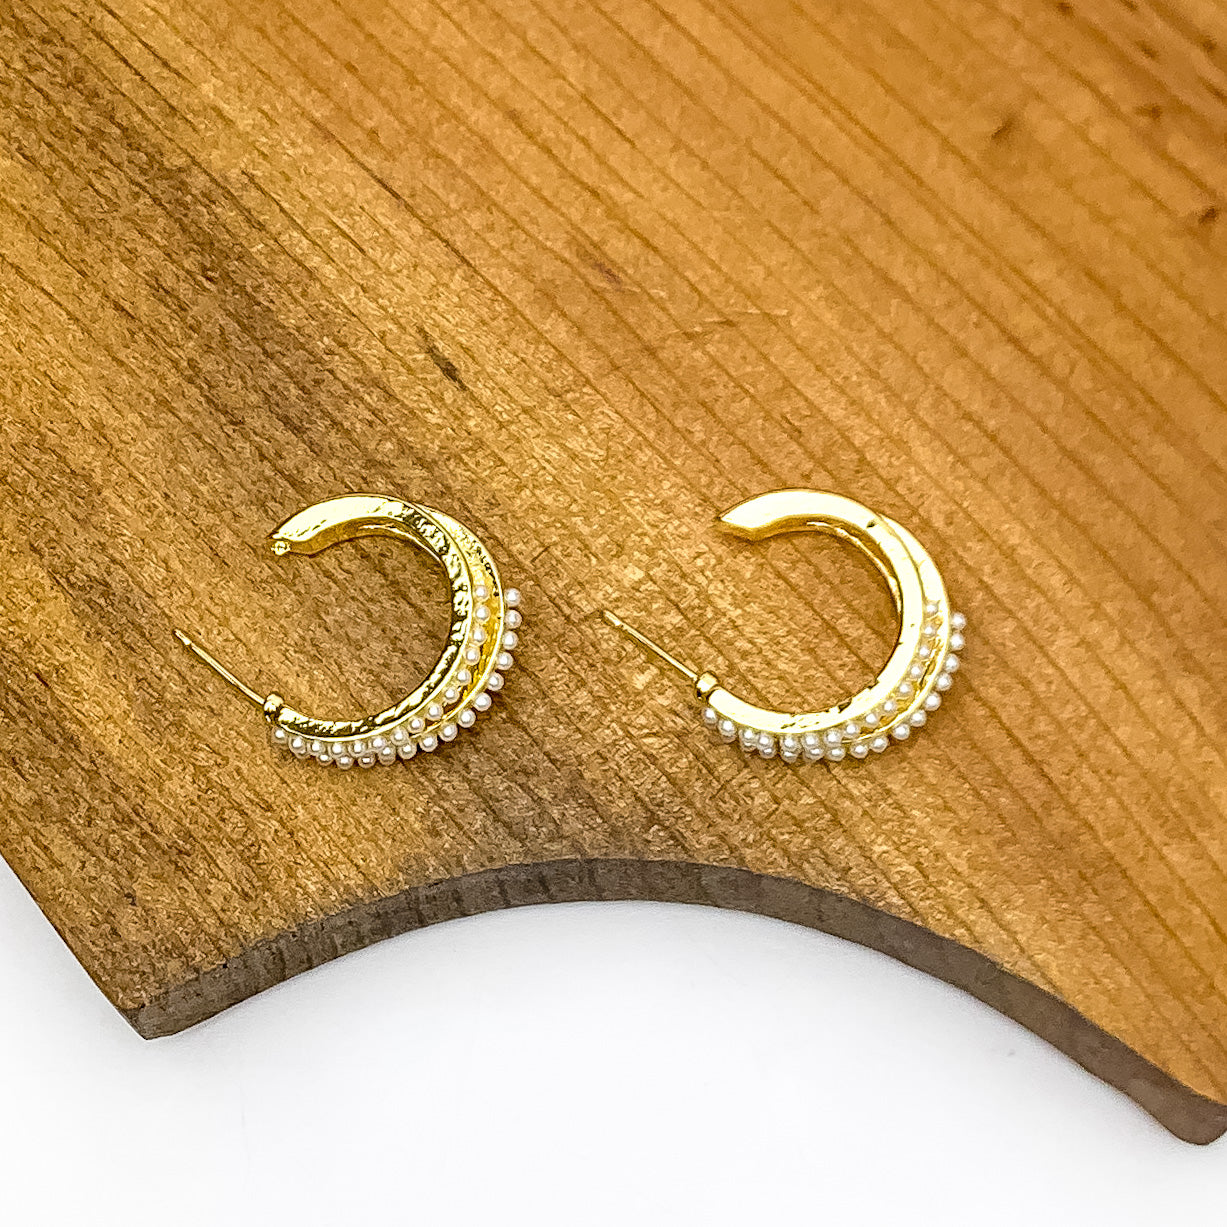 Small Gold Tone Hoop Earrings Outlined in Pearls - Giddy Up Glamour Boutique